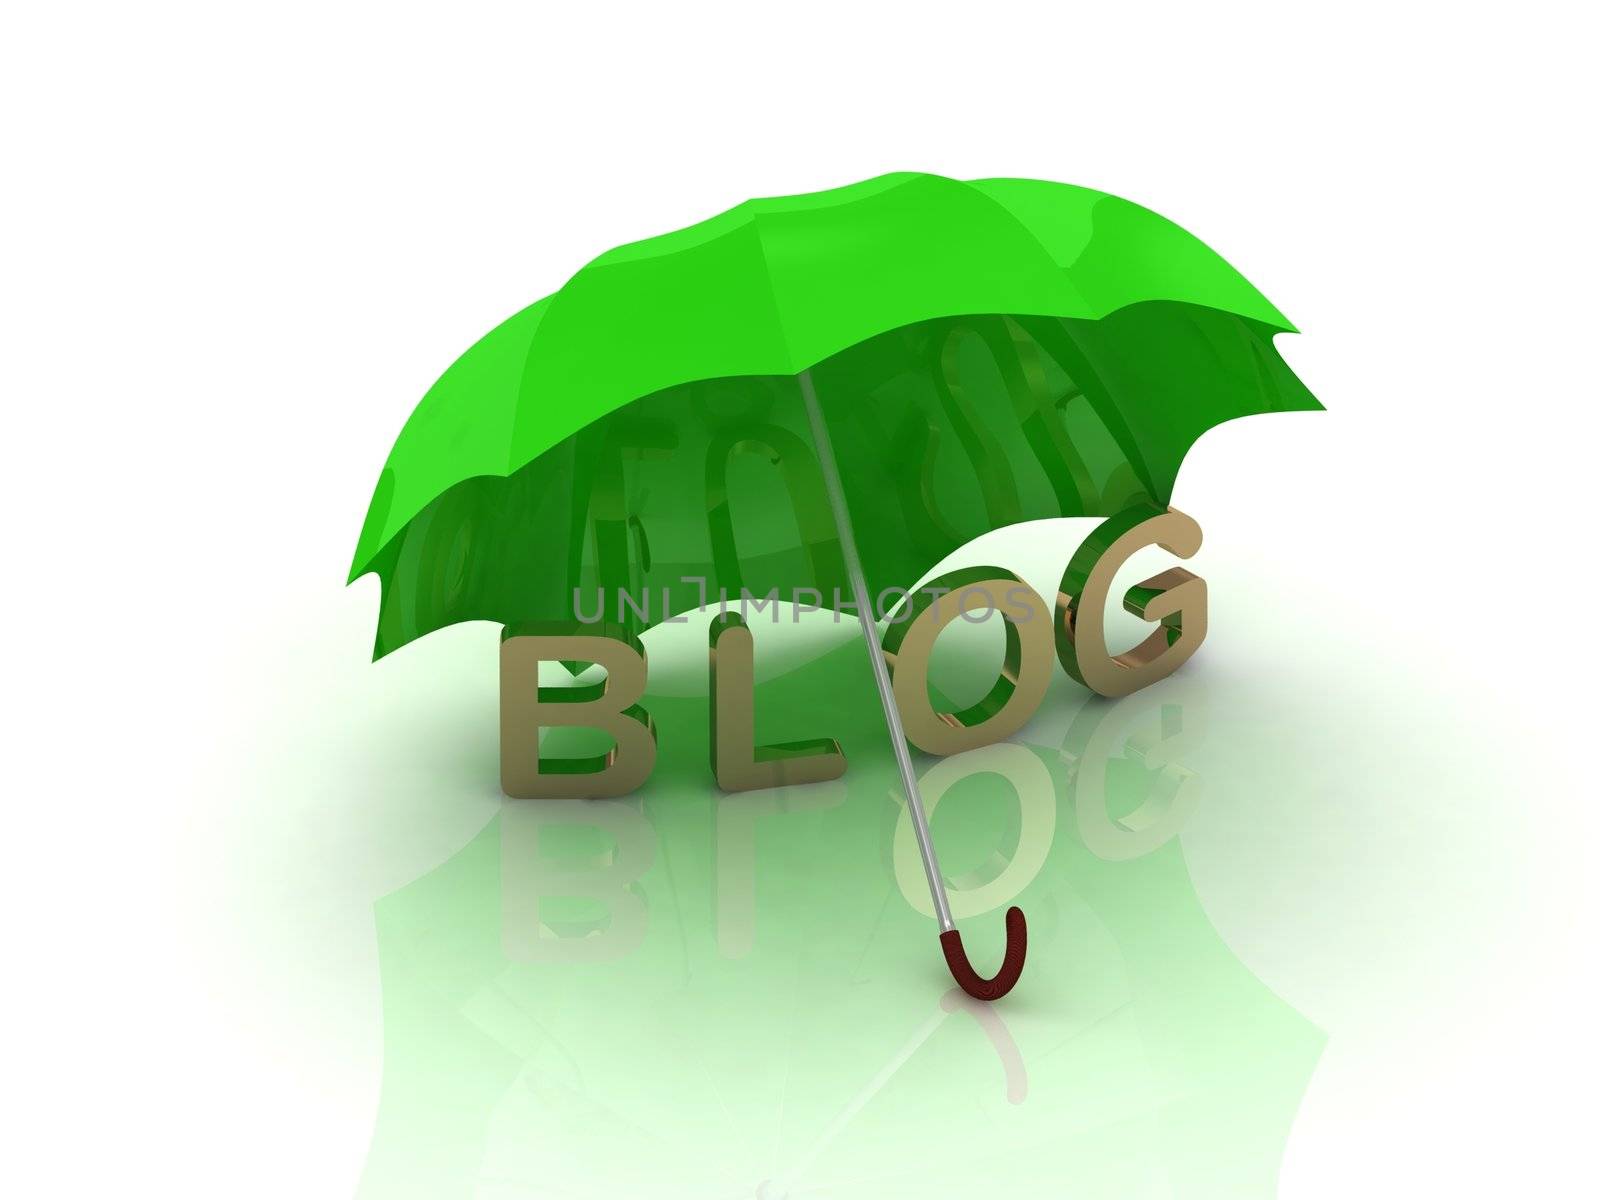 abstraction of the blog under the green umbrella